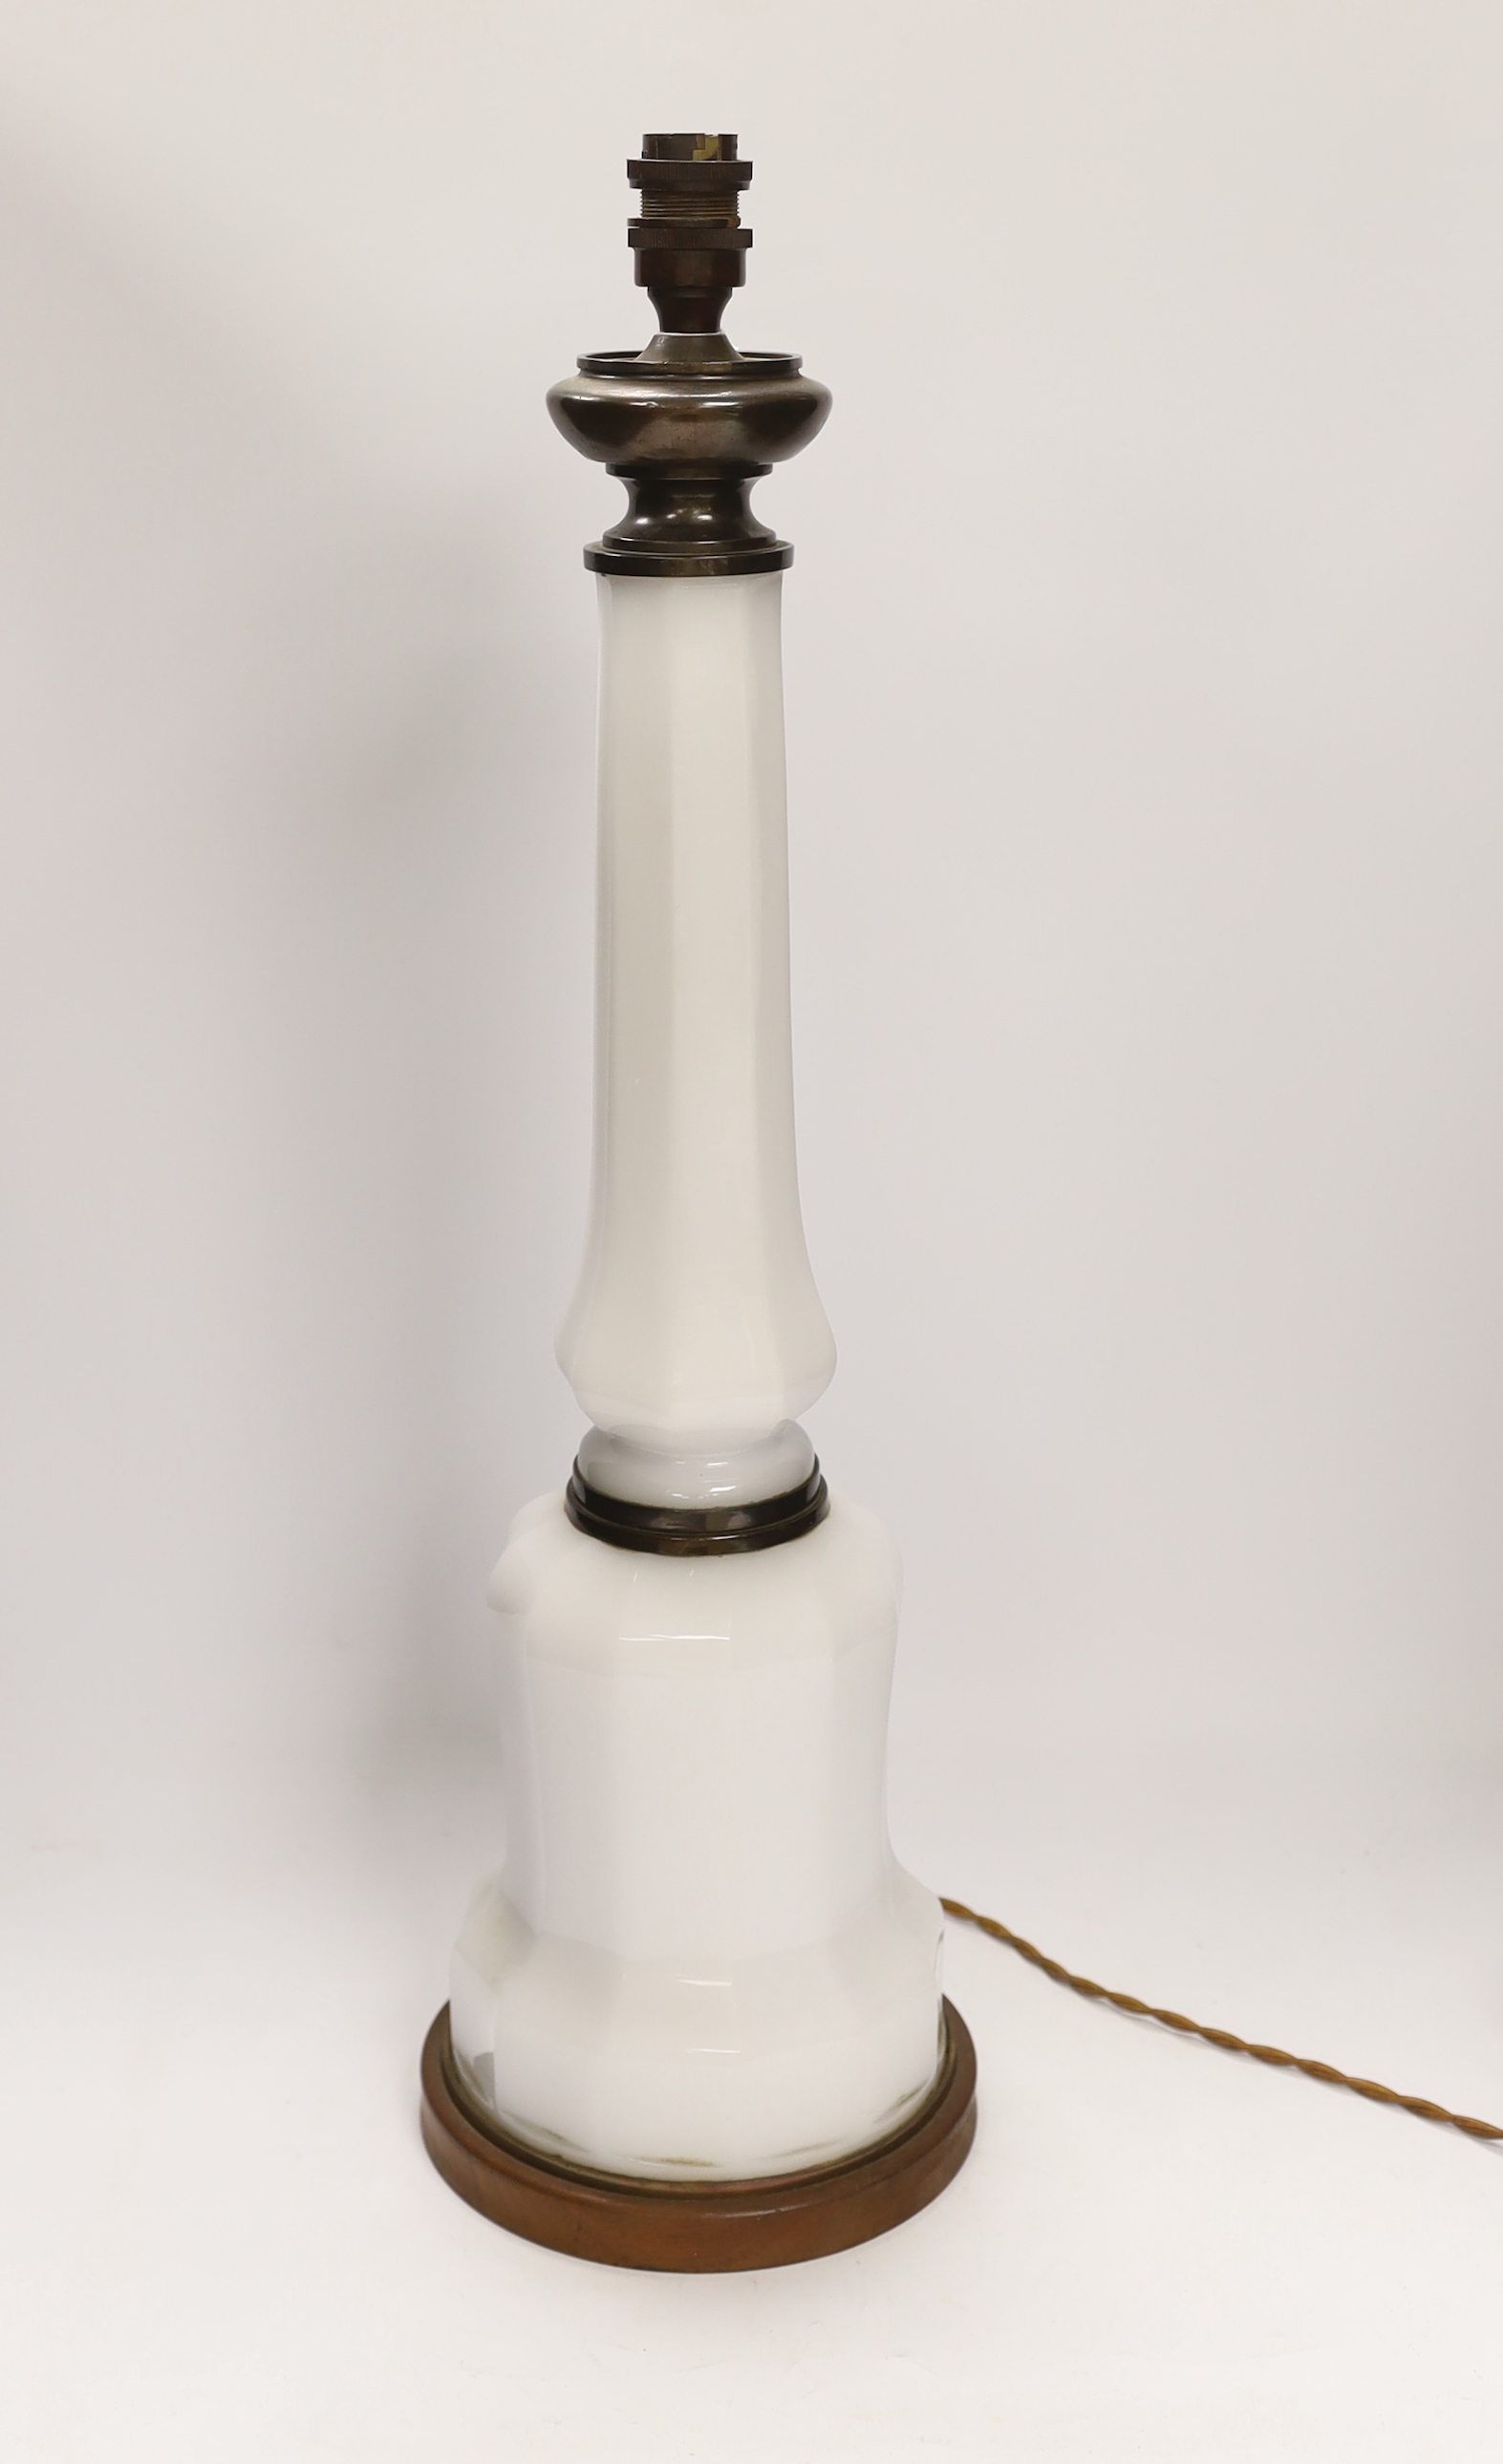 A tall opaline glass table 'Heiberg' lamp base, 60cm high including light fitting